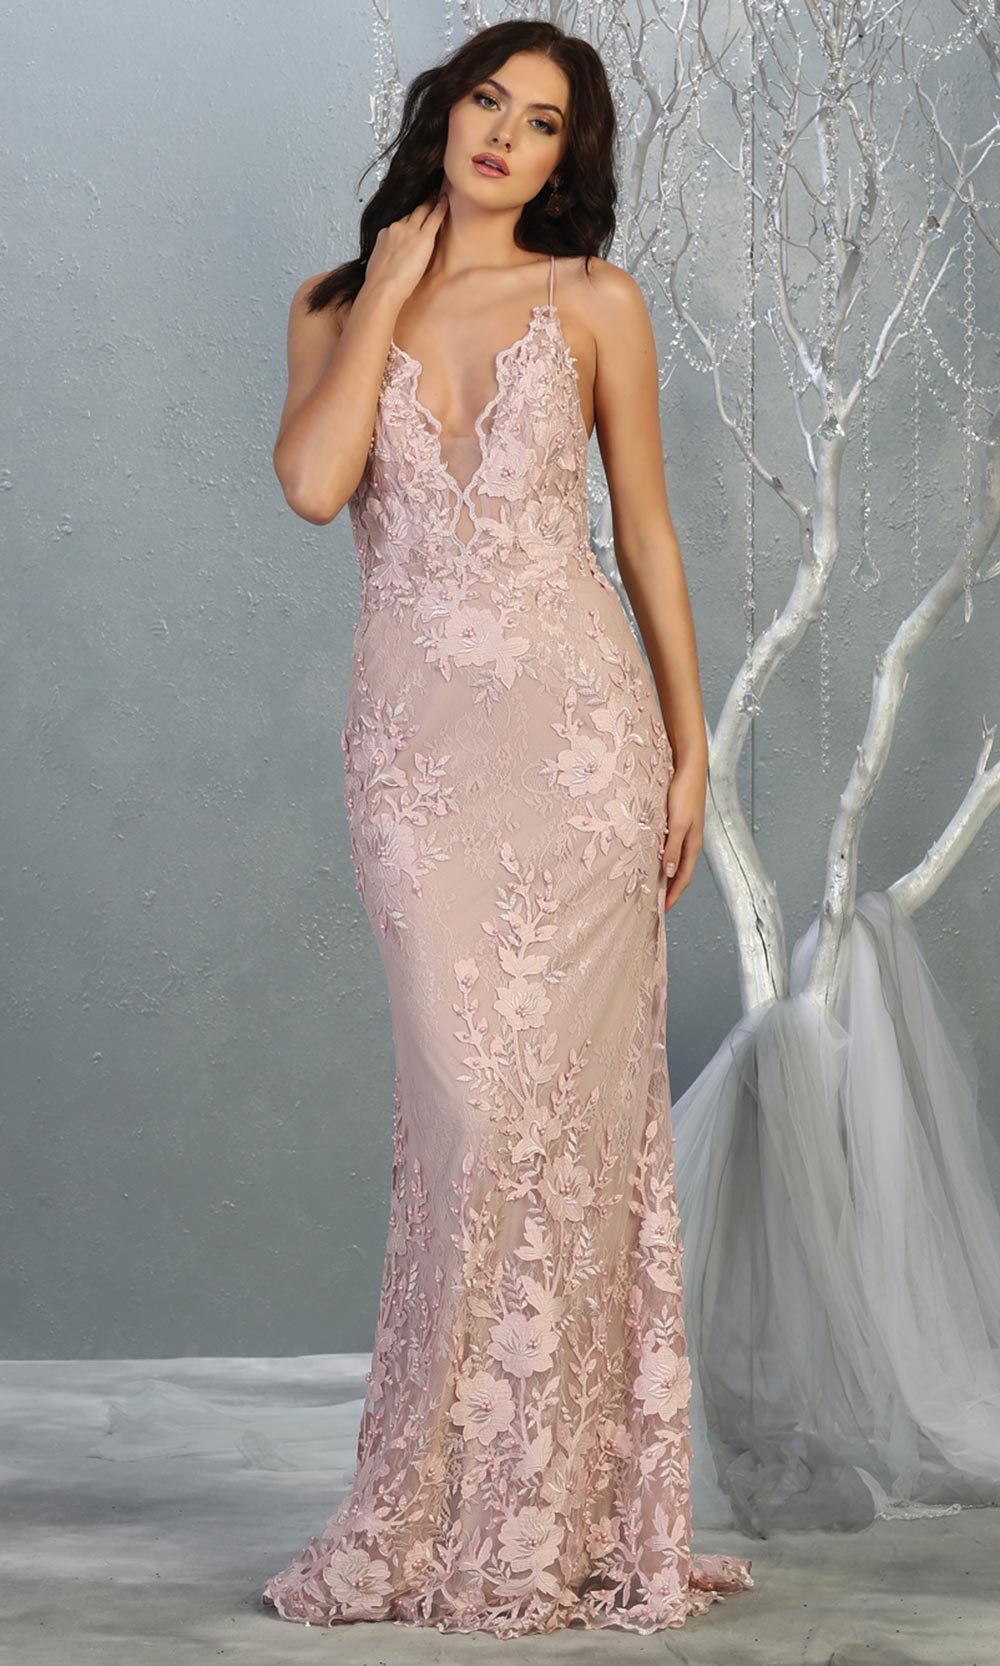 Mayqueen RQ7823 long mauve v neck evening fitted lace dress w/straps. Full length light pink gown is perfect for  enagagement/e-shoot dress, formal wedding guest, indowestern gown, evening party dress, prom, bridesmaid. Plus sizes avail-1.jpg